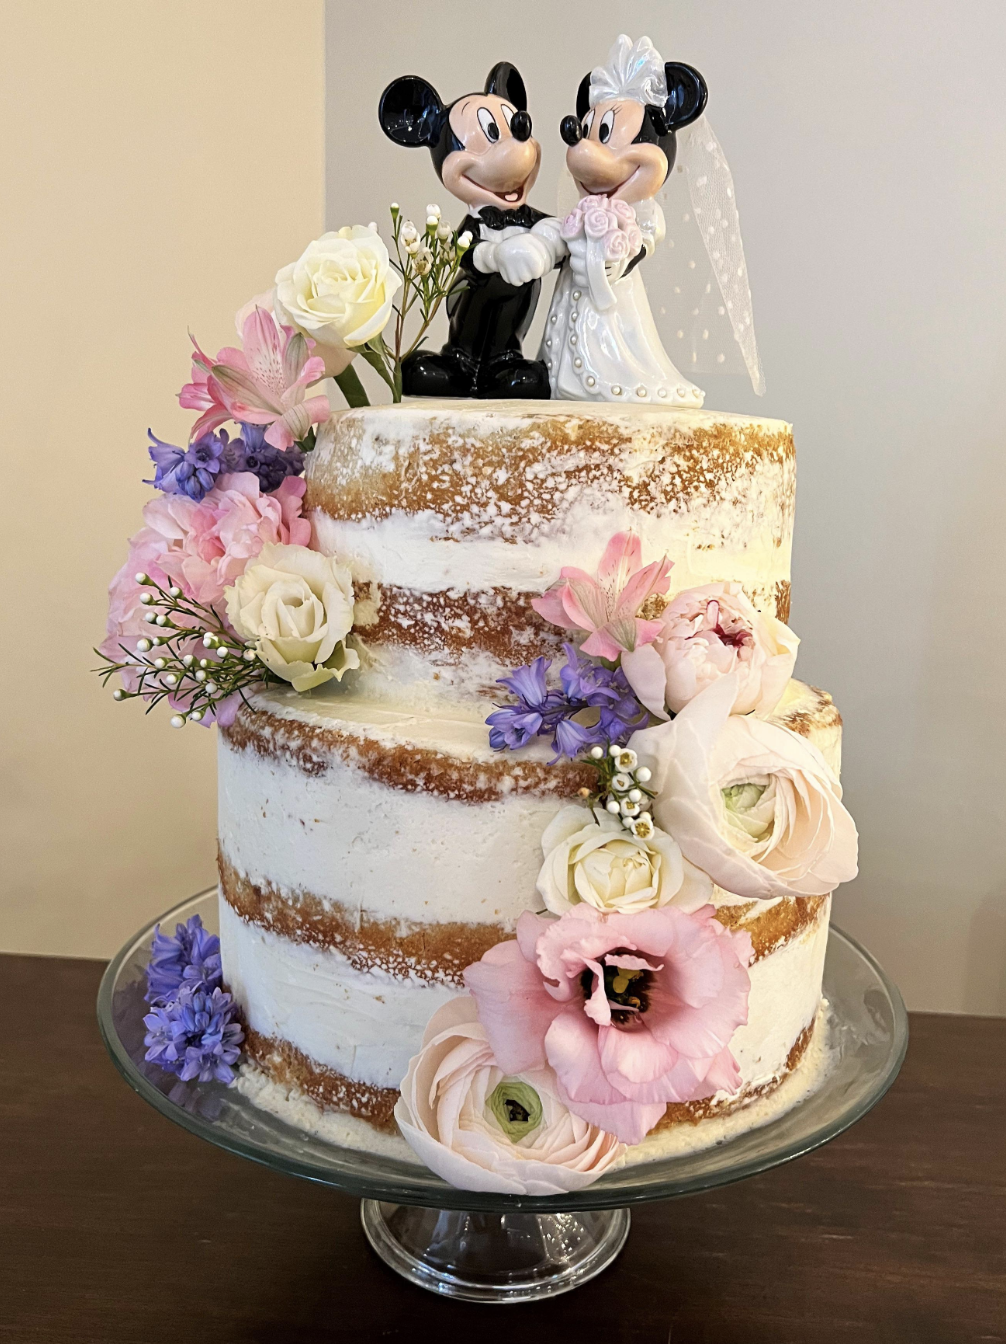 A wedding cake with Mickey and Minnie as cake toppers